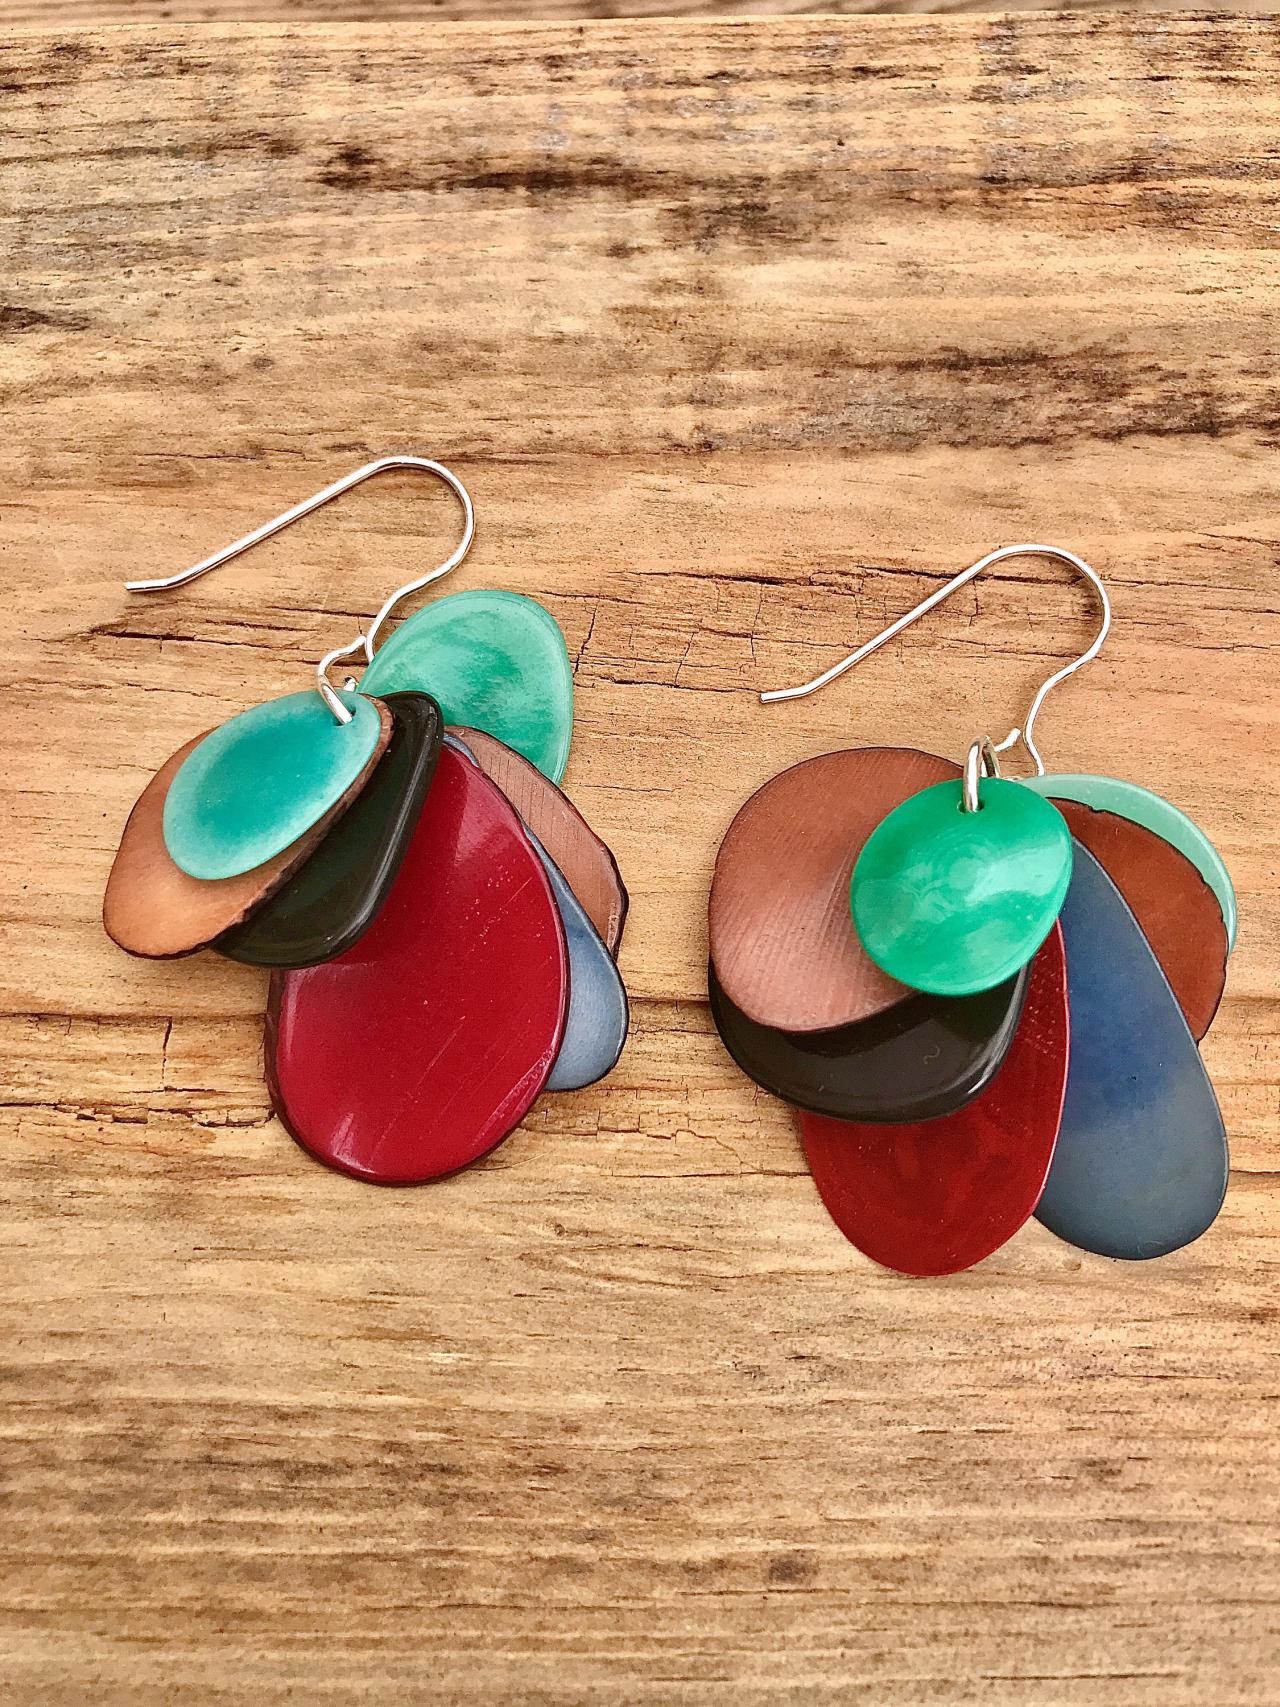 Green Brown & Russets Tagua Nut (vegetable Ivory) Dangle Earrings With Sterling Silver Wires.